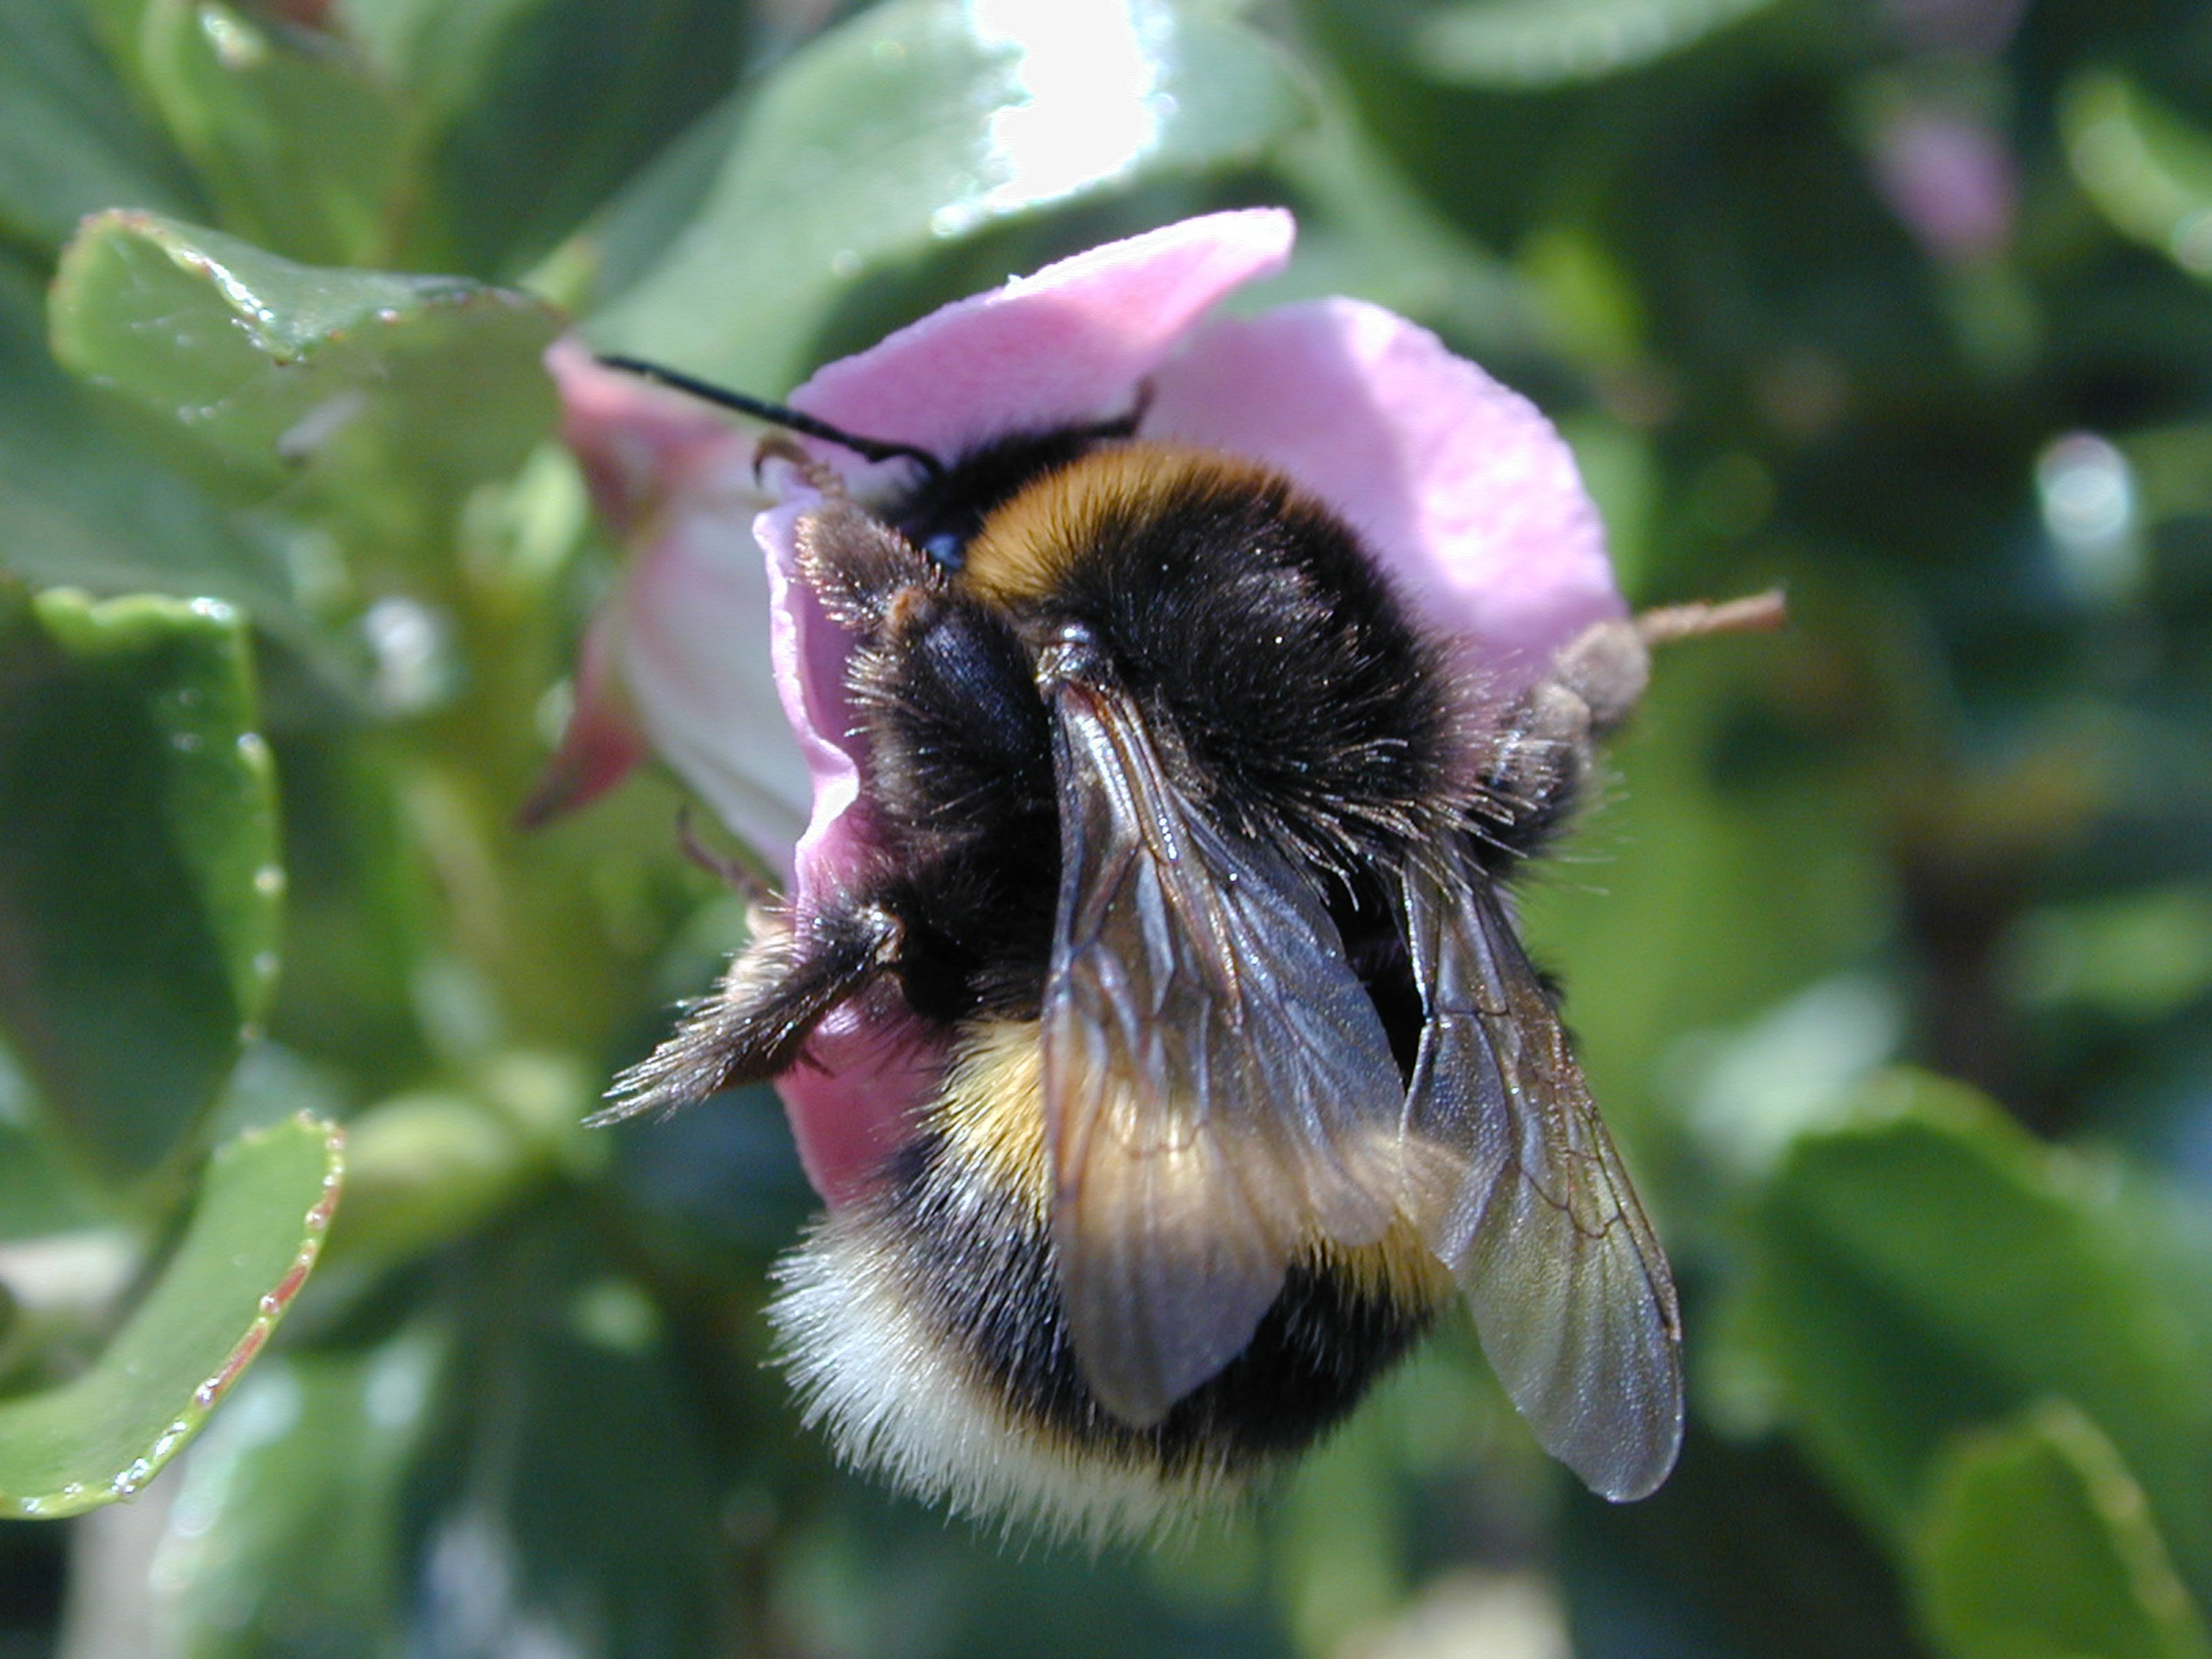 Bumble bee on escallonia flowers (Alamy/PA)